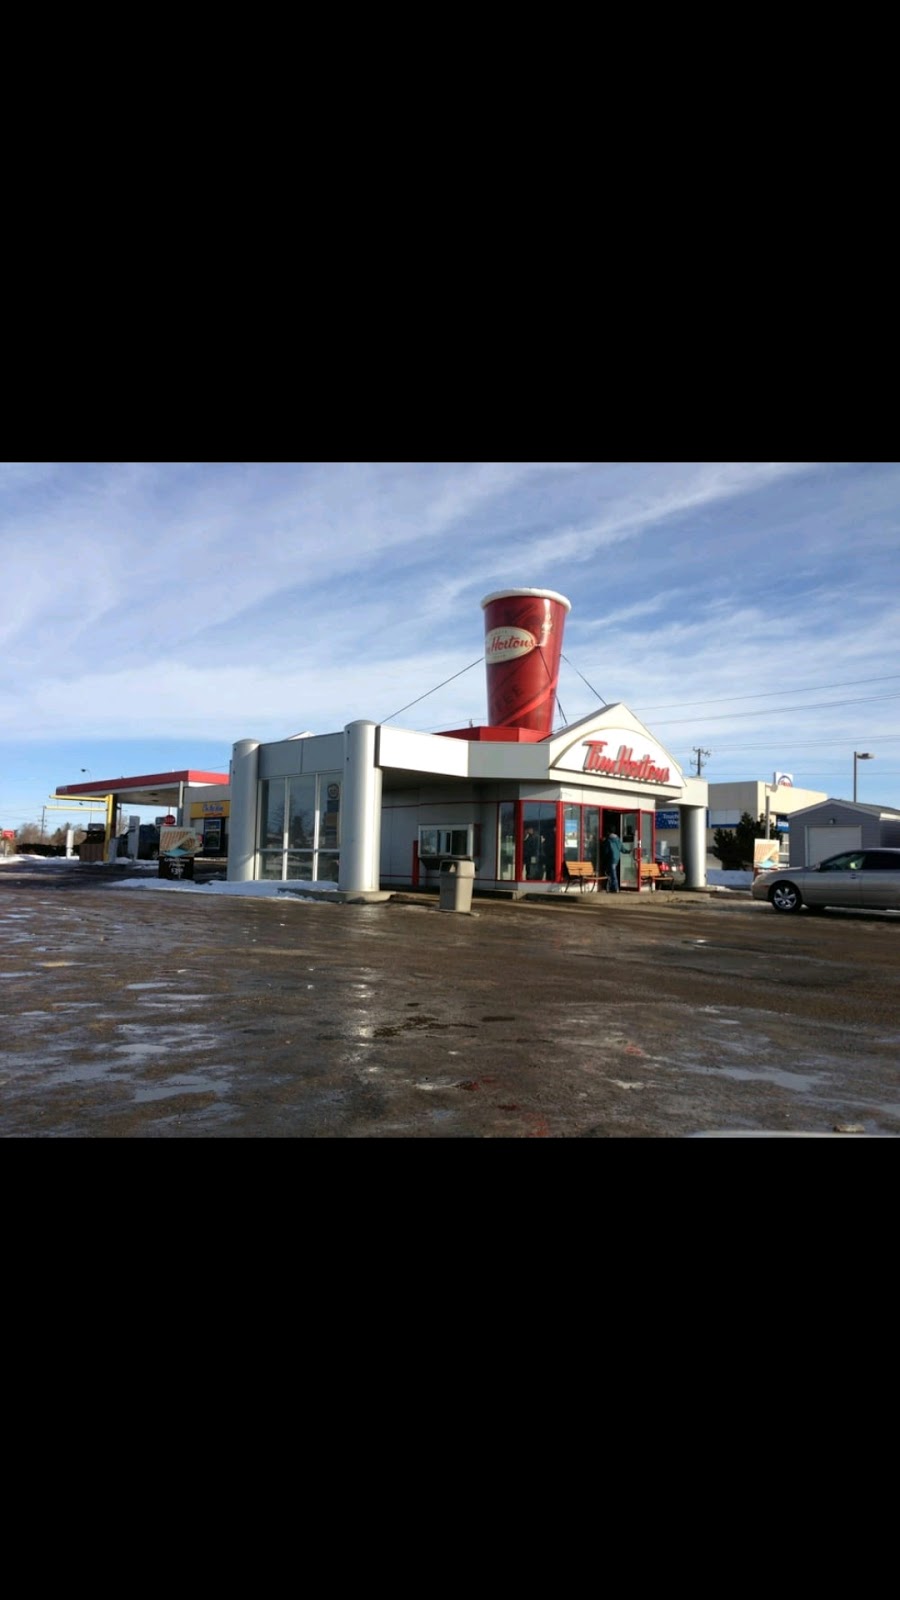 Tim Hortons | 5003 101 Ave NW, Edmonton, AB T6A 0G8, Canada | Phone: (780) 468-2990